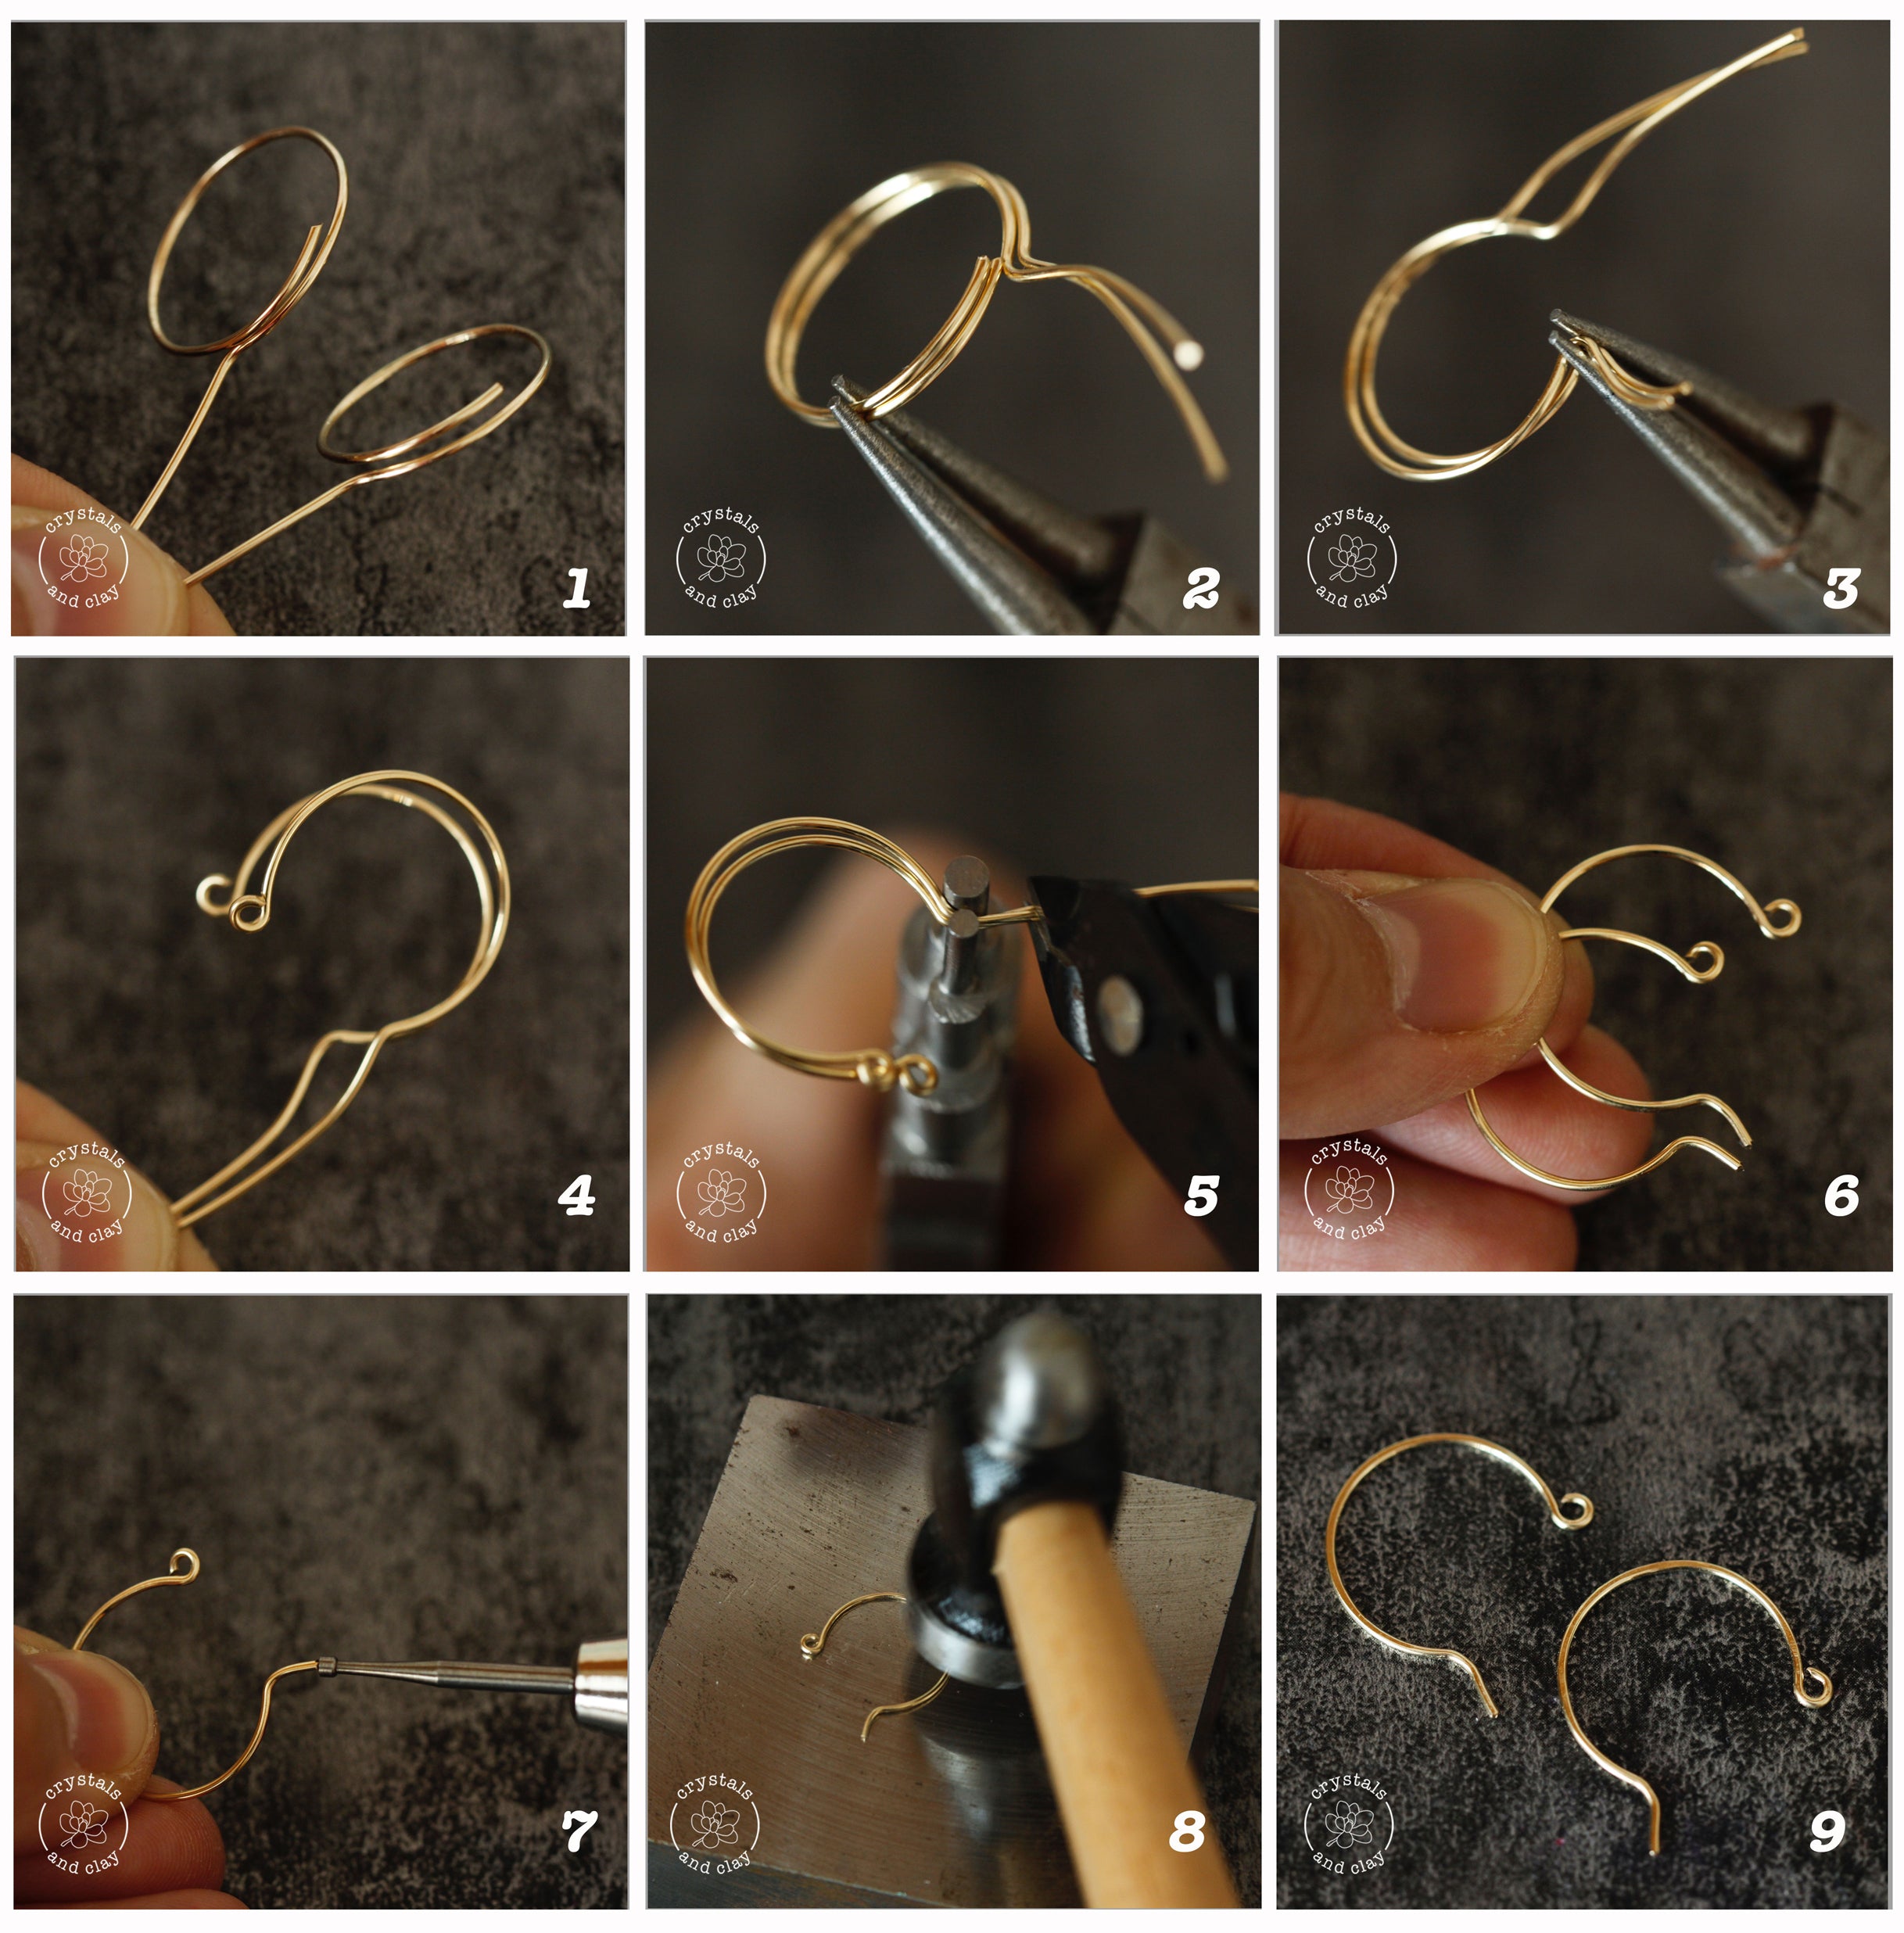 Jewelry Making Basics 4 – Five Ways To make Ear Wires – Crystals